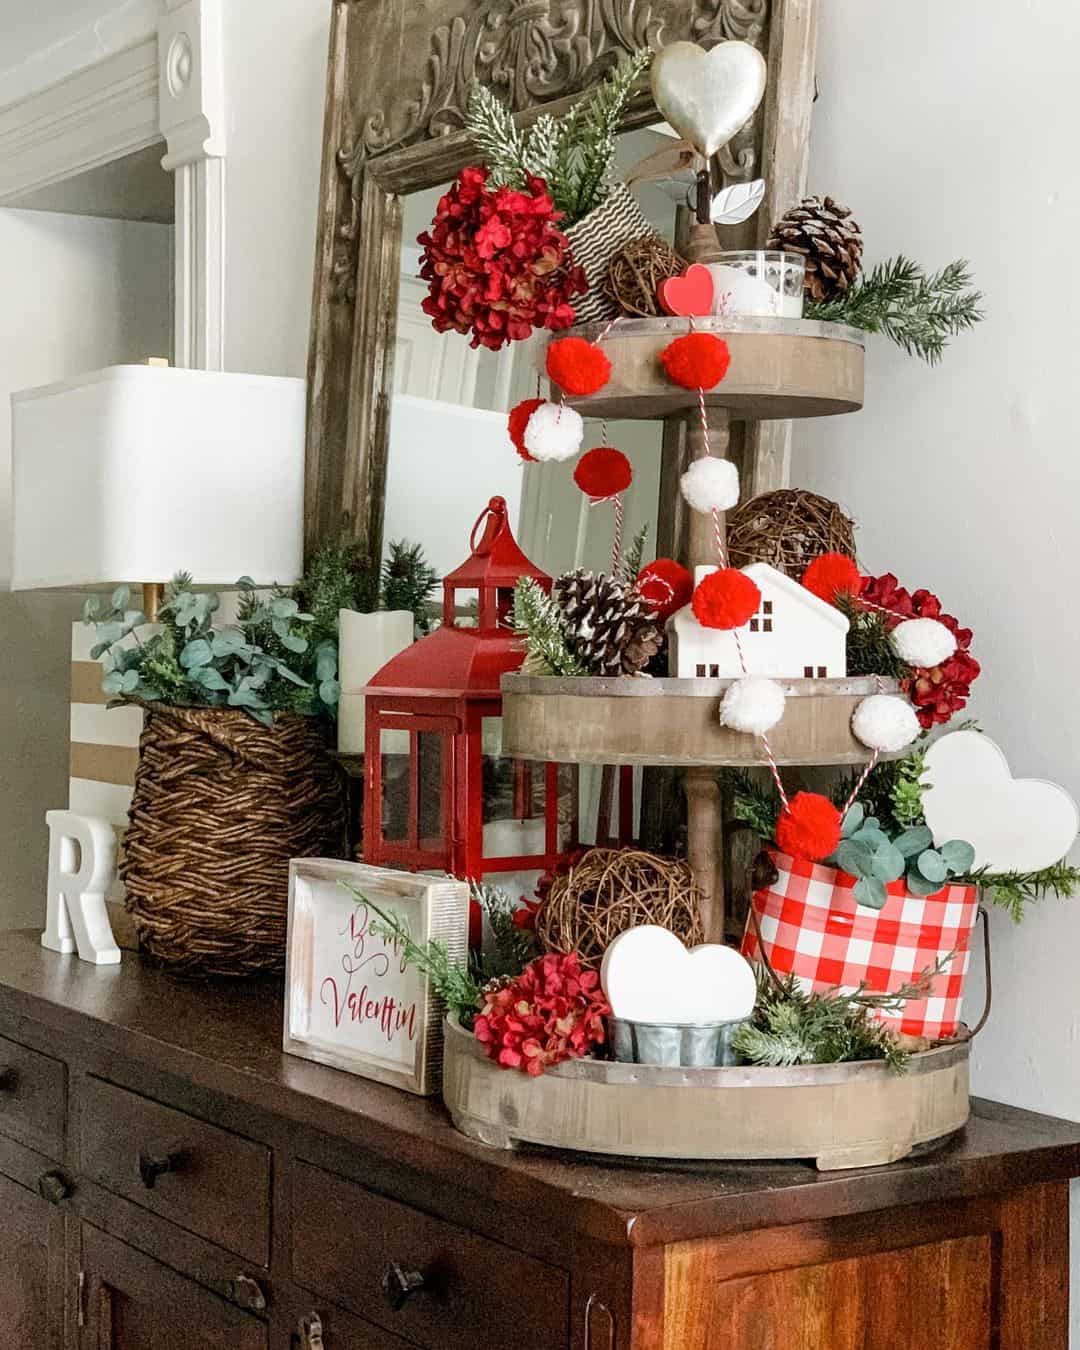 Pops of Red, White, and Plaid Christmas Display - Soul & Lane